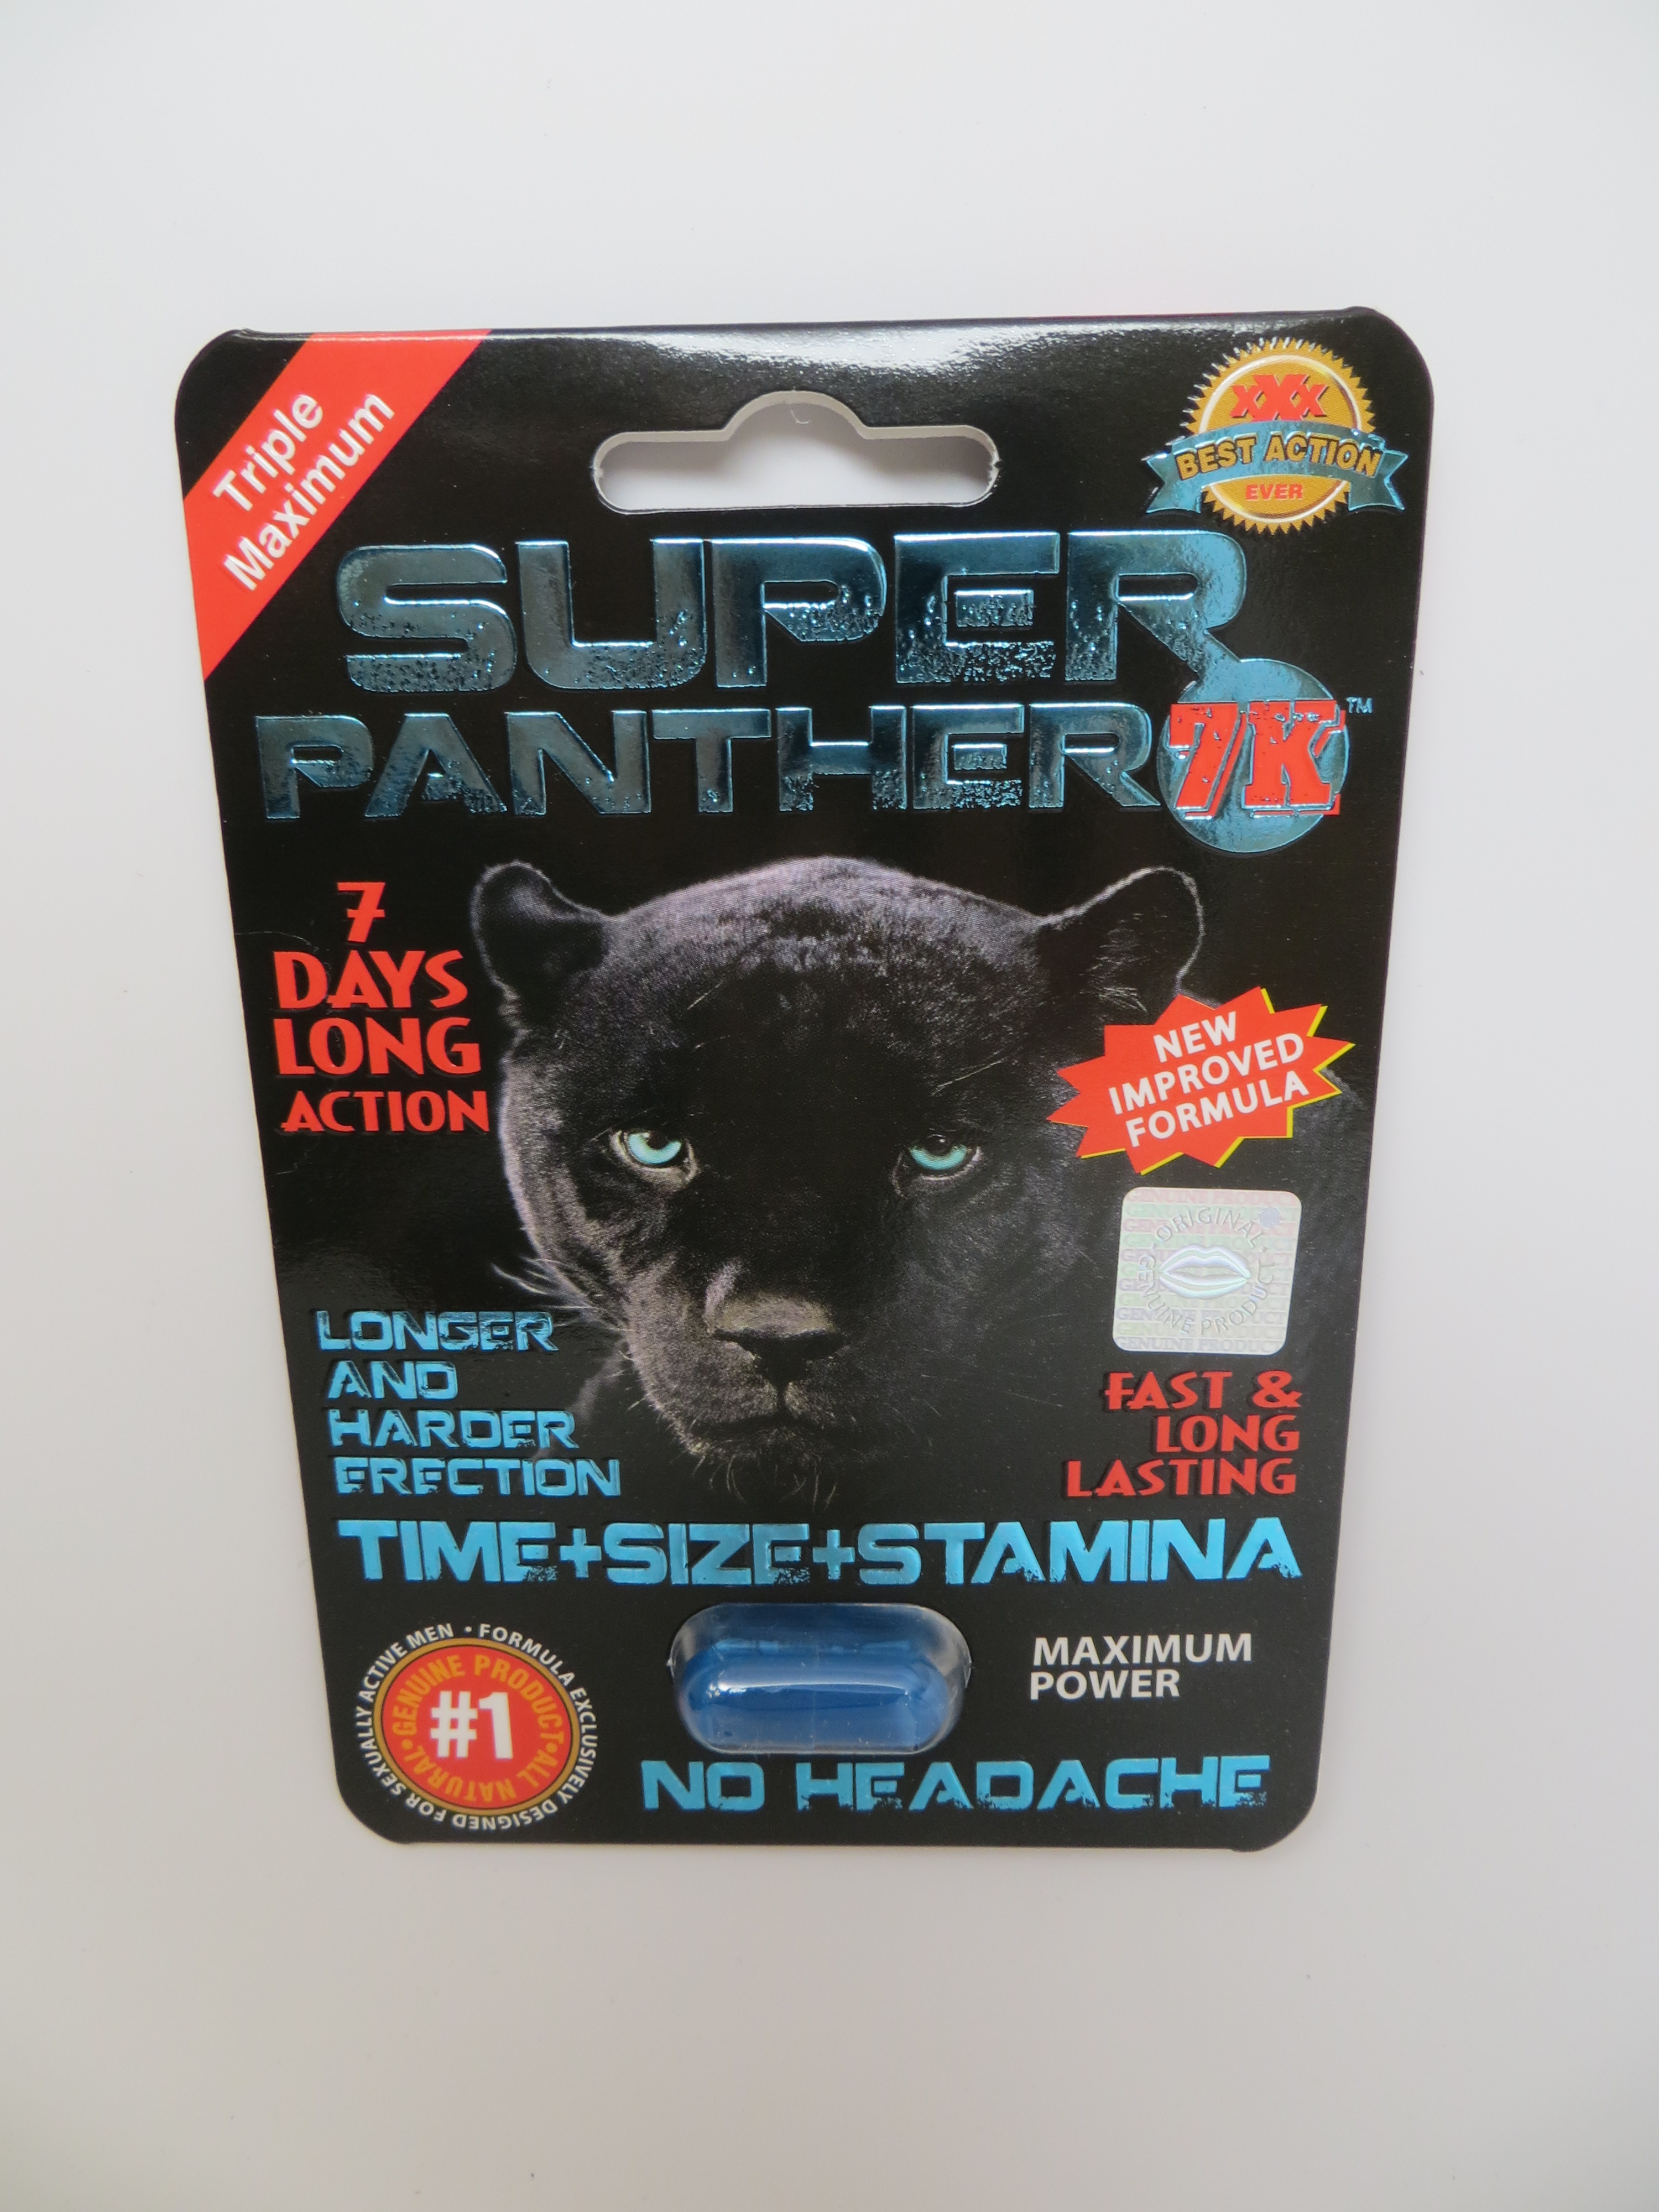 Image Super Panther 7K Product